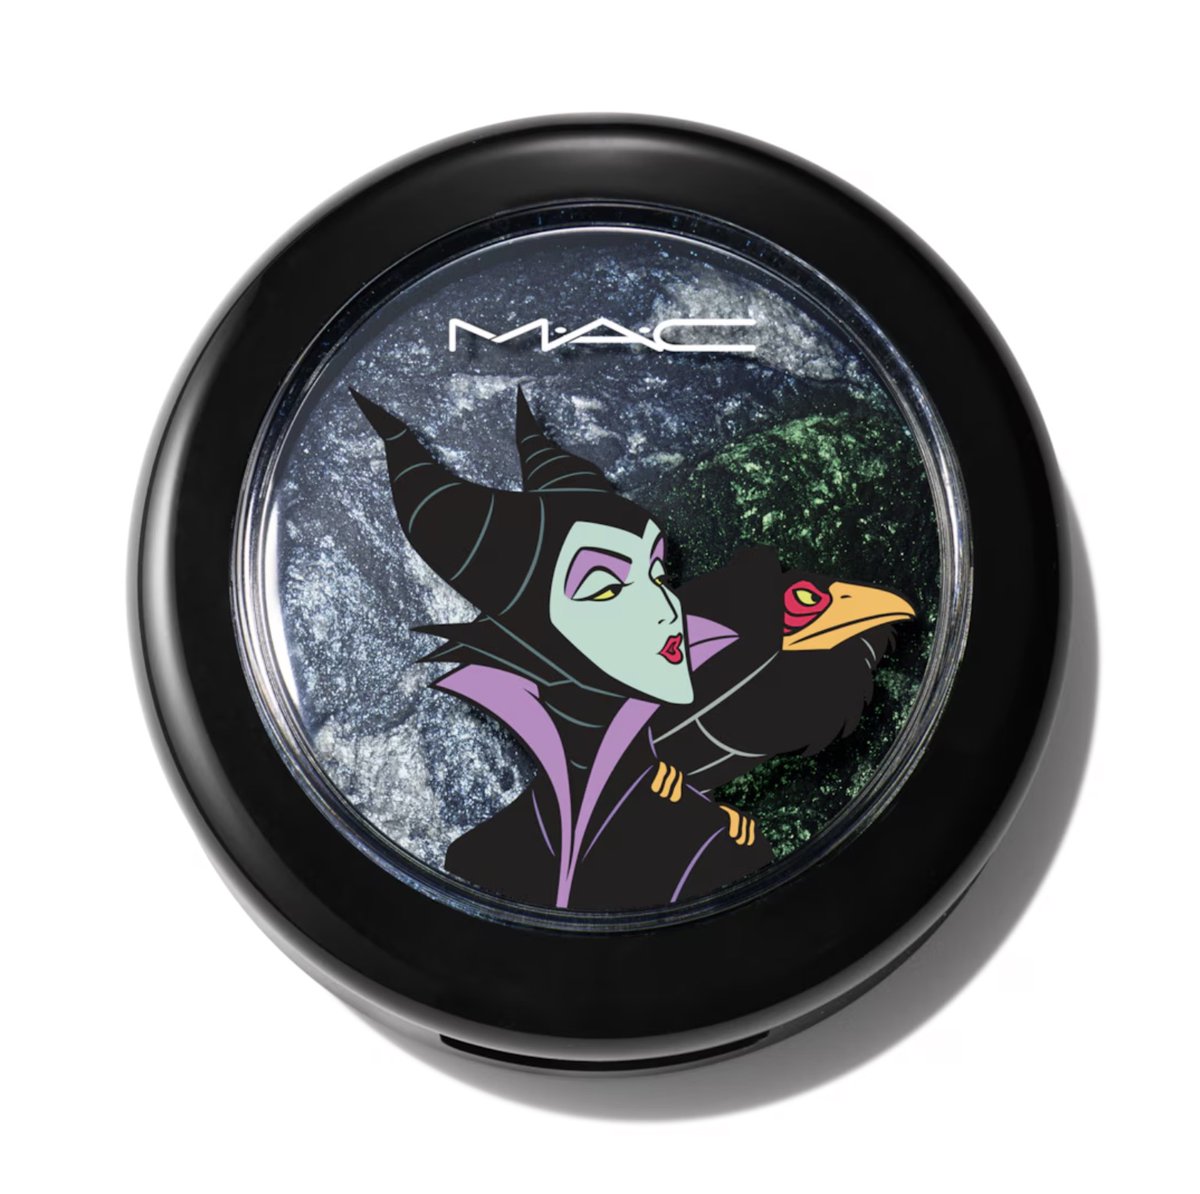 I'm loving the rerelease of MAC's Maleficent Mineralize Eyeshadow Duo from 2010's MAC Venomous Villains collection. It's two shimmery baked shadows - a deep navy with blue pearl and forest green. It's called 'She Who Dares', a part of the MAC 40 Disney Favourites Collection.